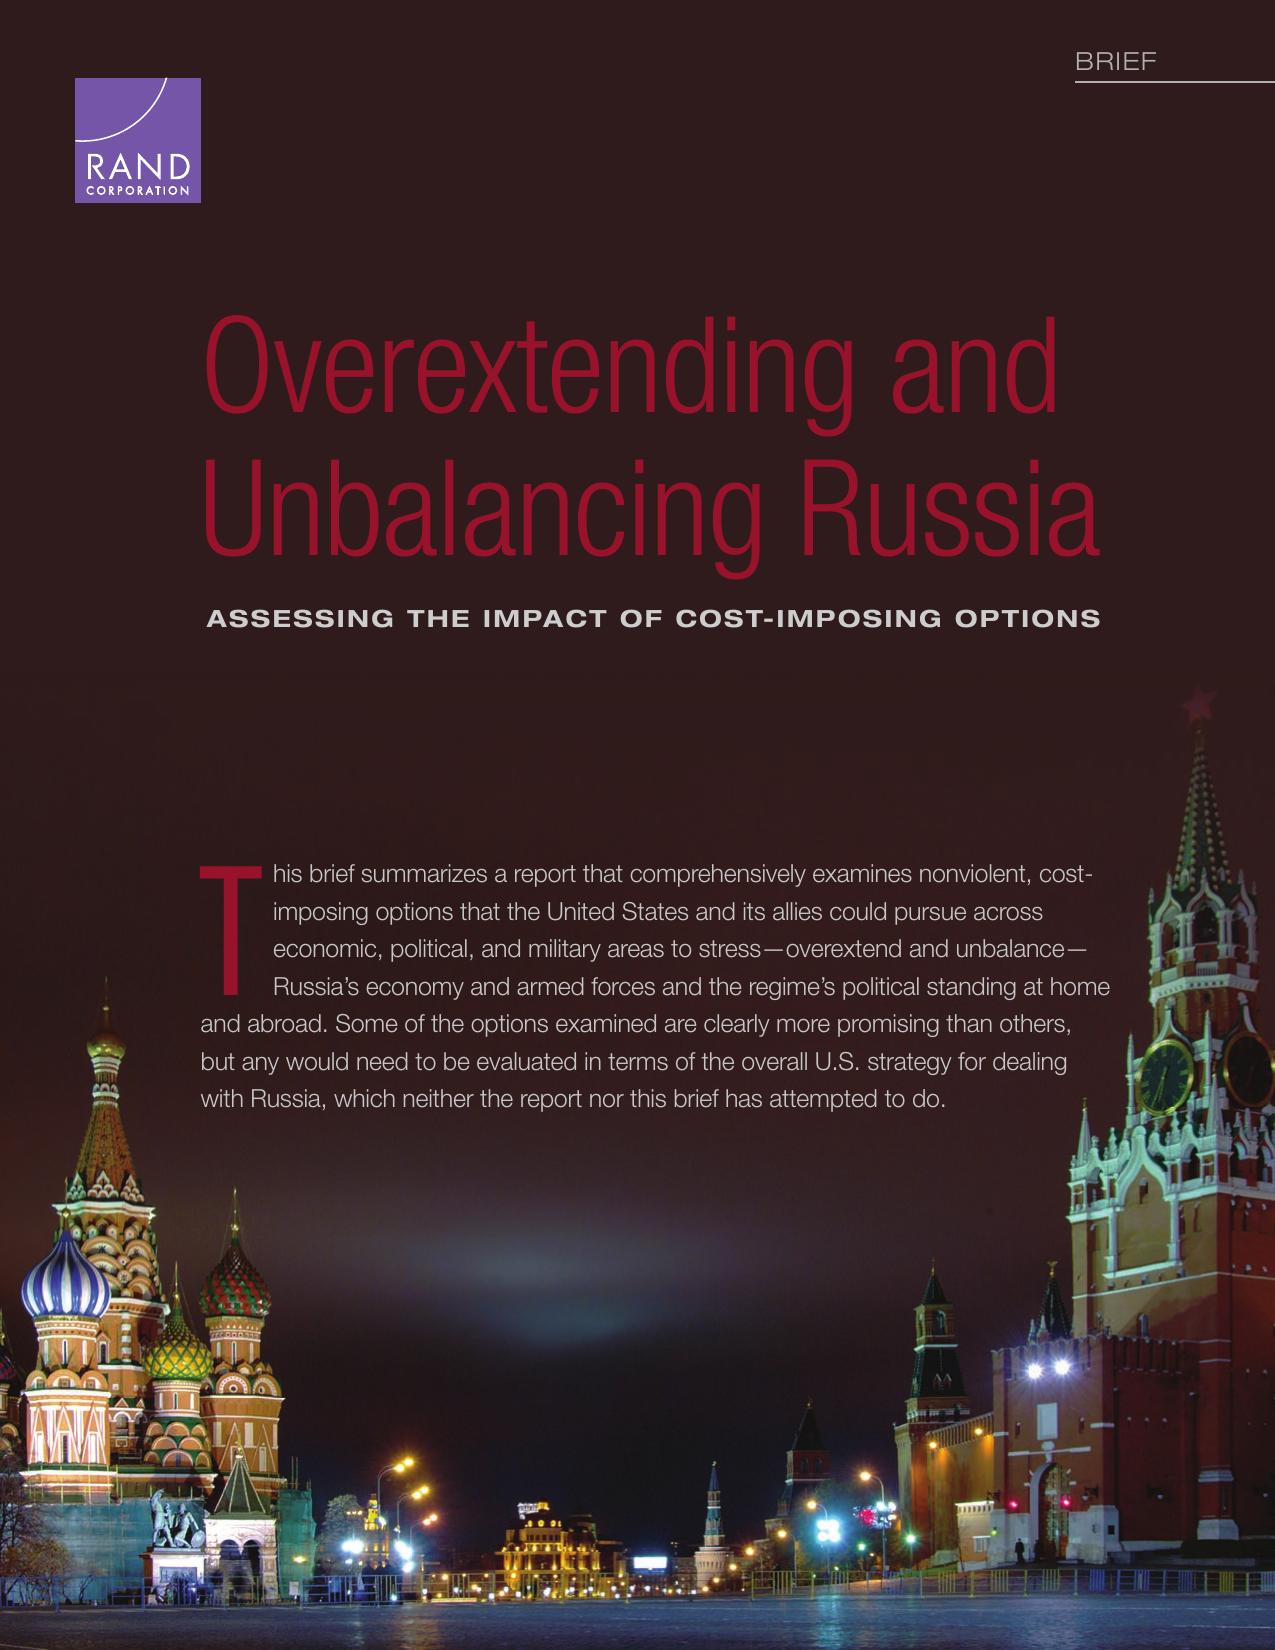 Overextending and Unbalancing Russia: Assessing the Impact of Cost-Imposing Options